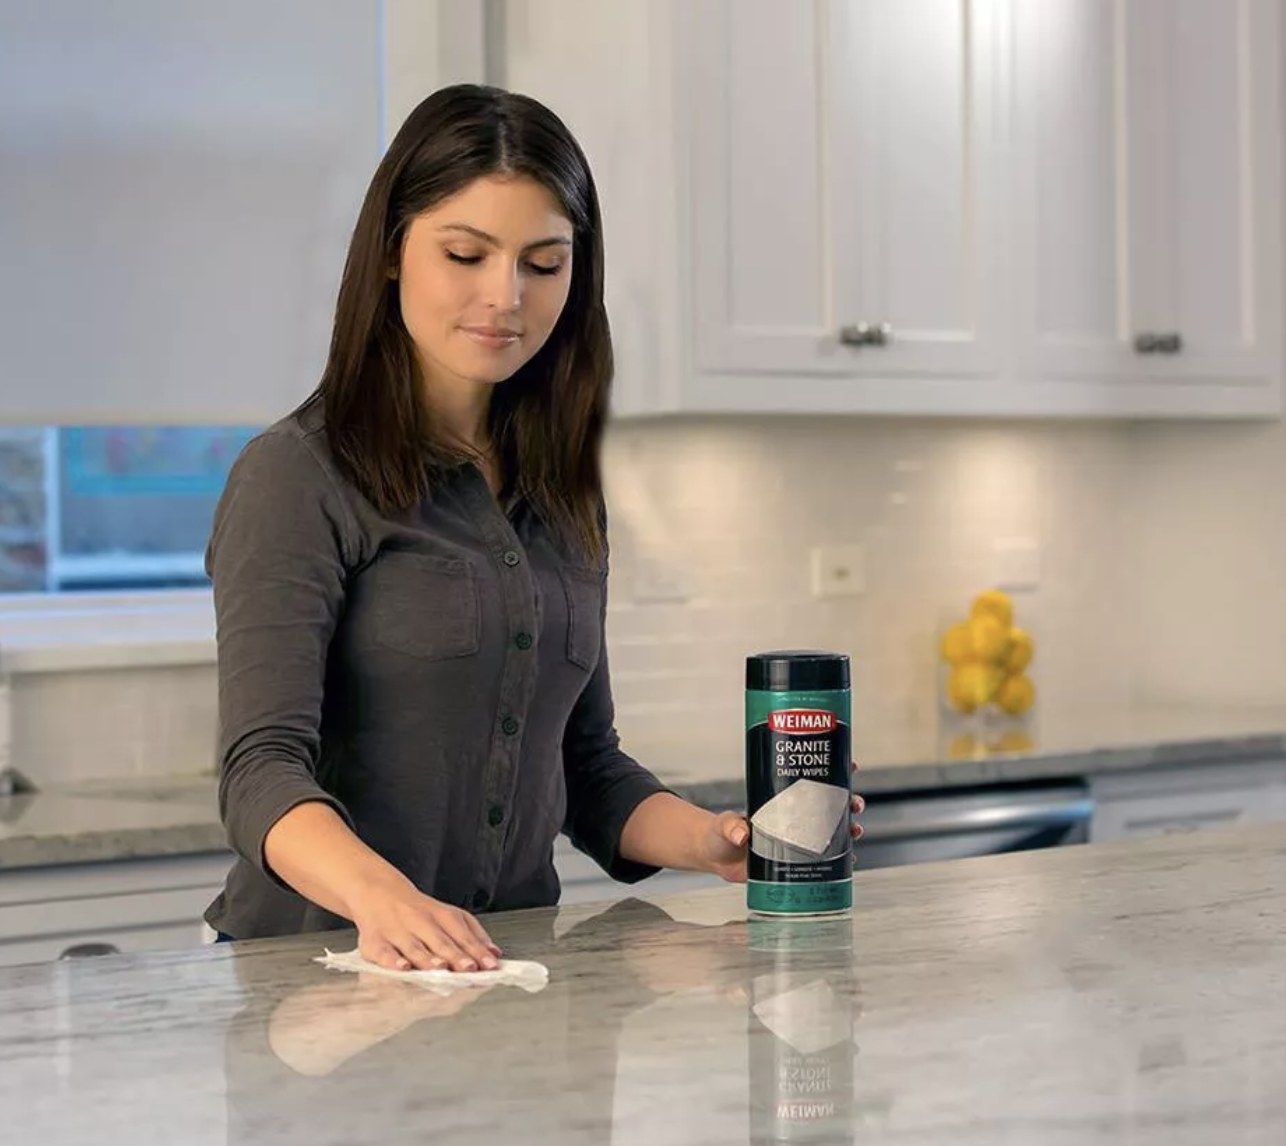 Woman uses wipes on counter